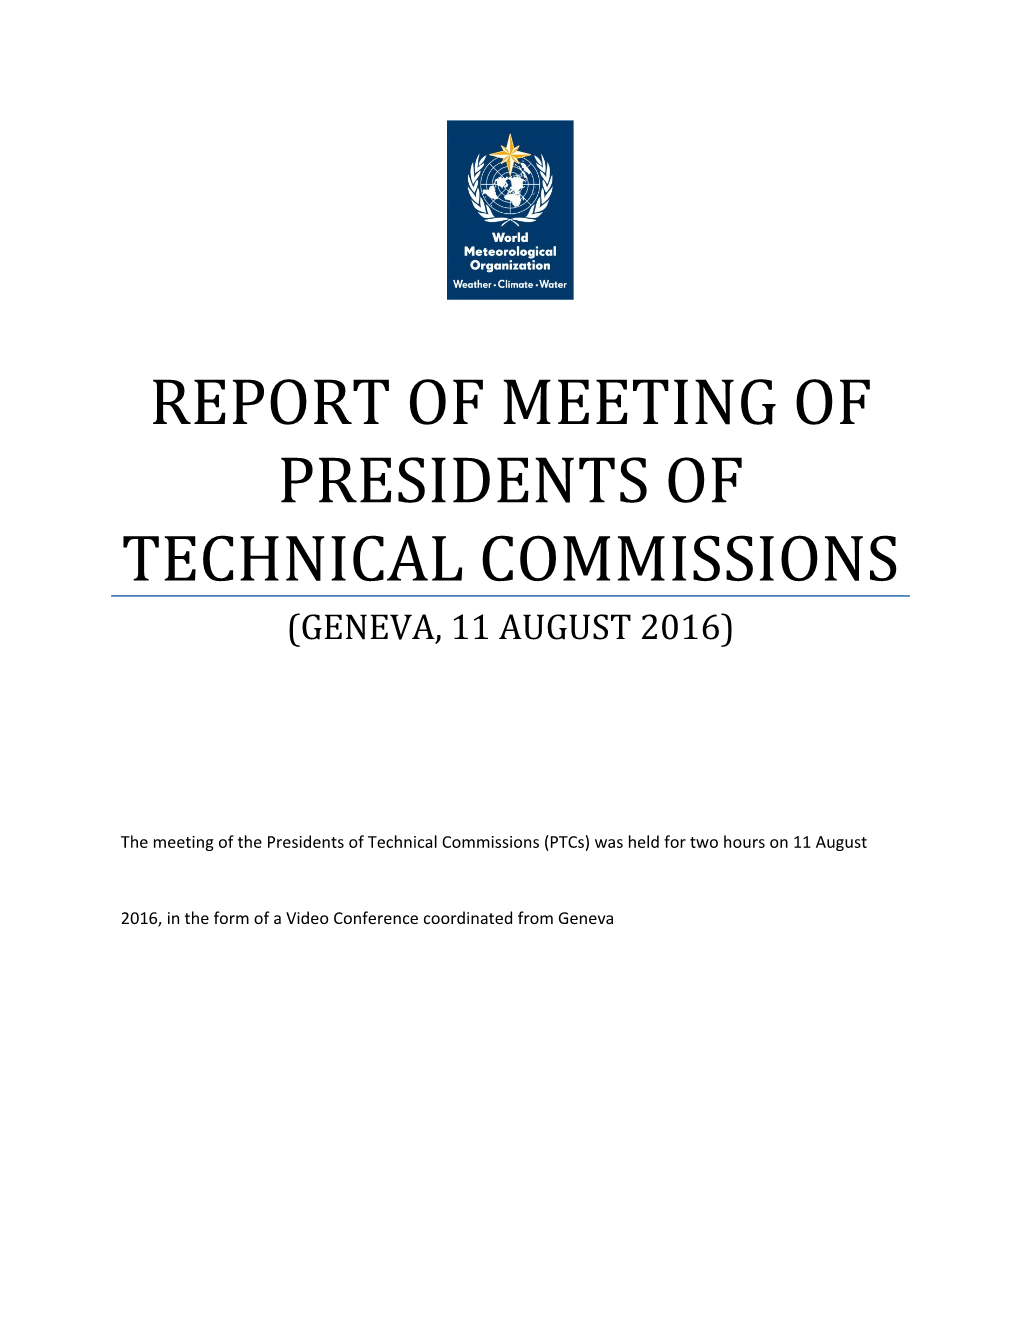 Report of Meeting of Presidents of Technical Commissions